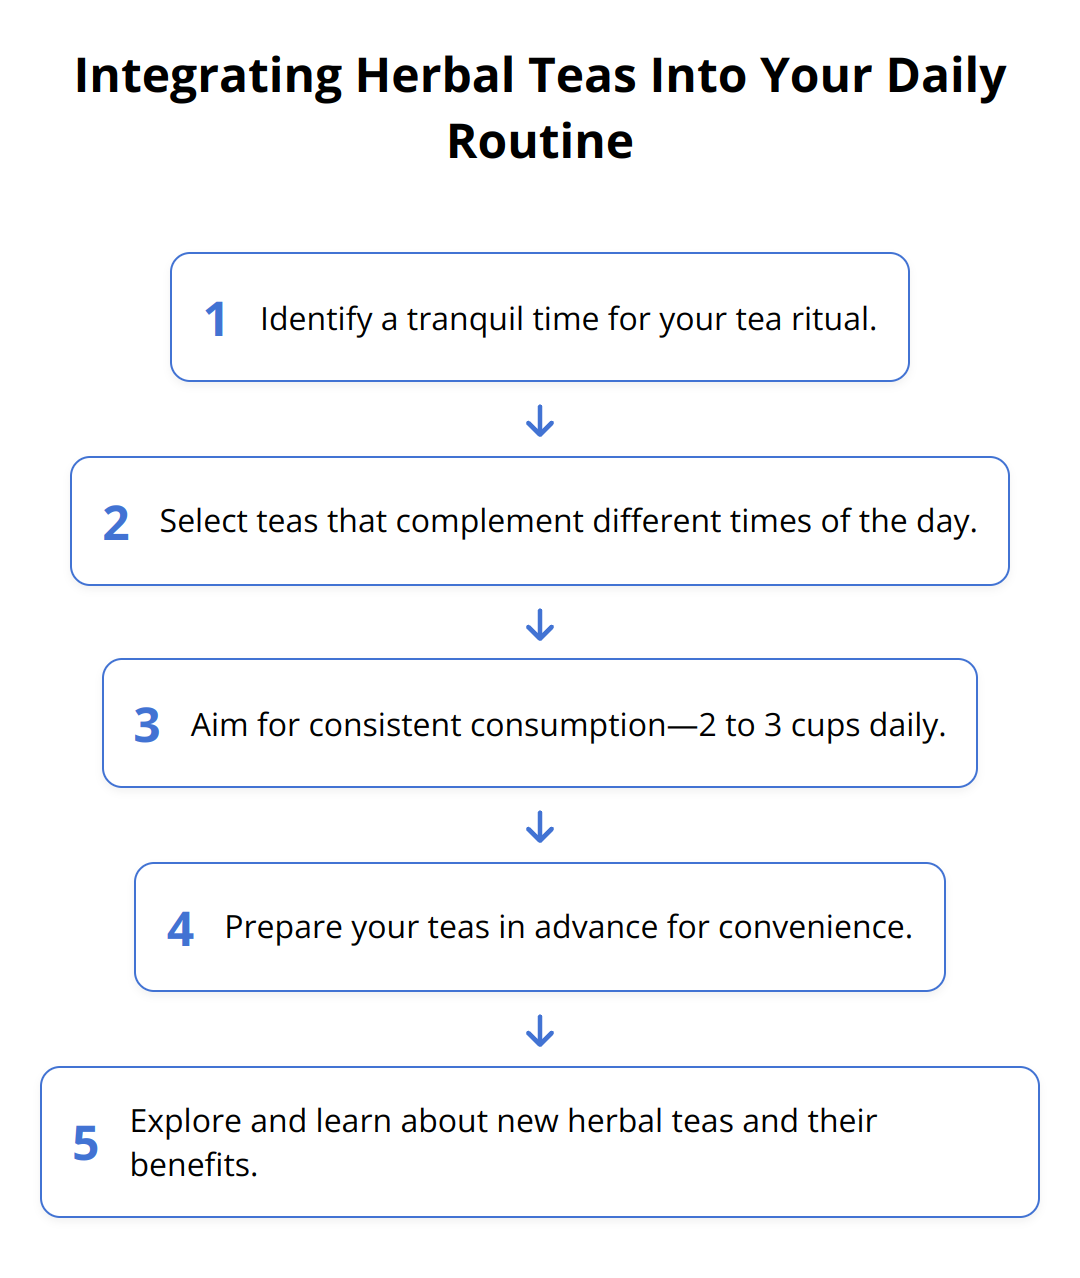 Flow Chart - Integrating Herbal Teas Into Your Daily Routine